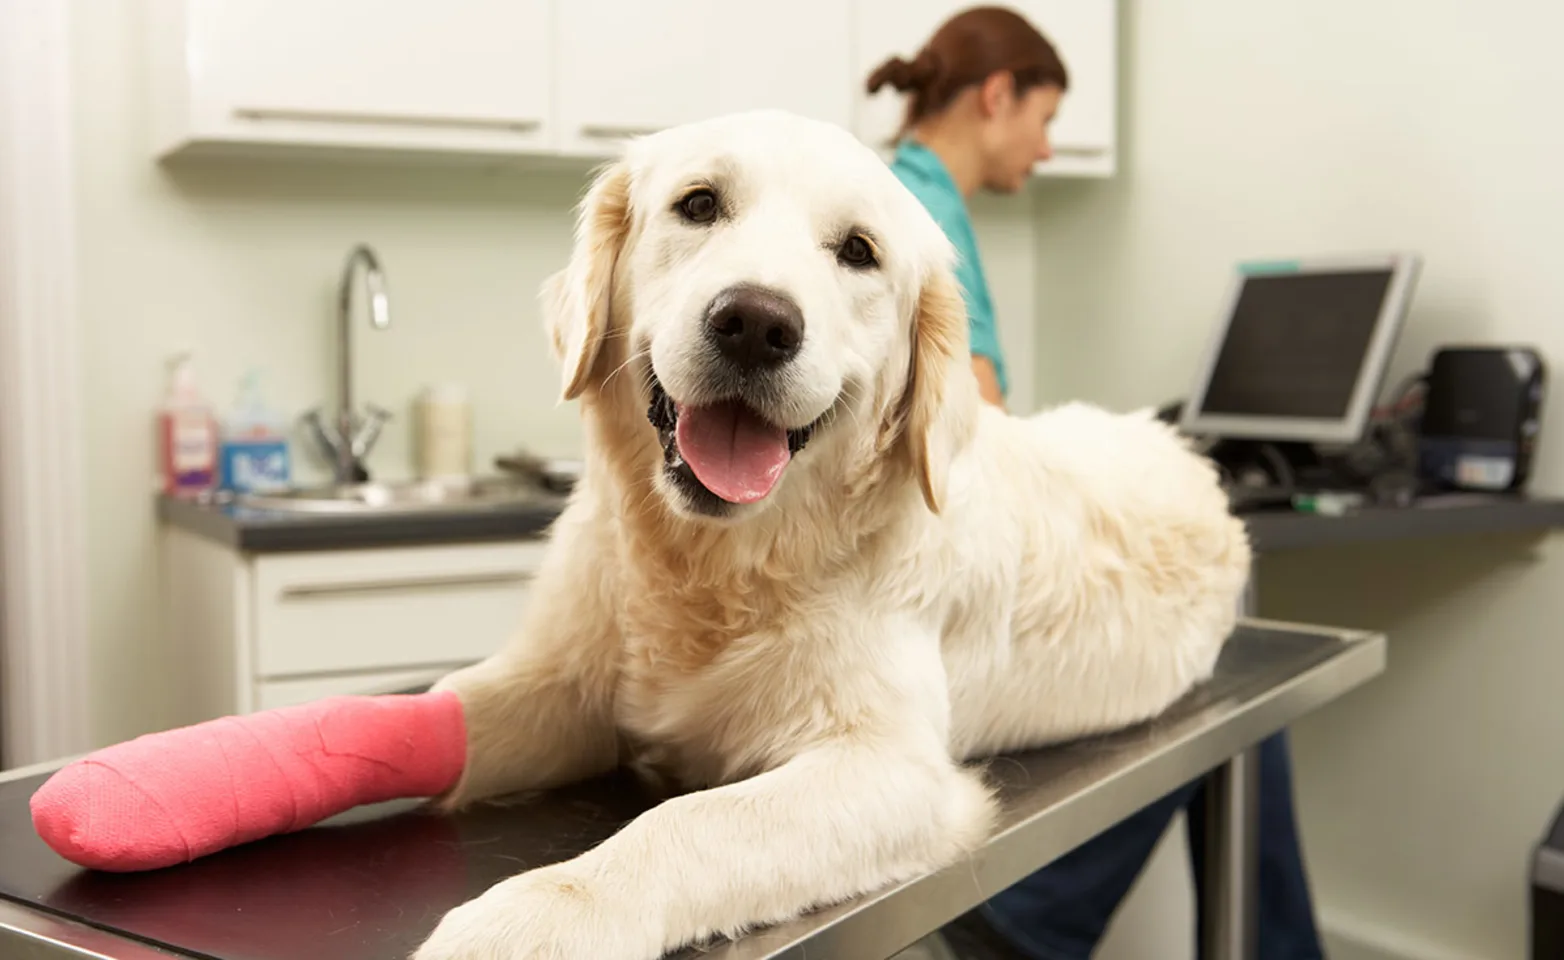 Dog on examination table with pink cast on